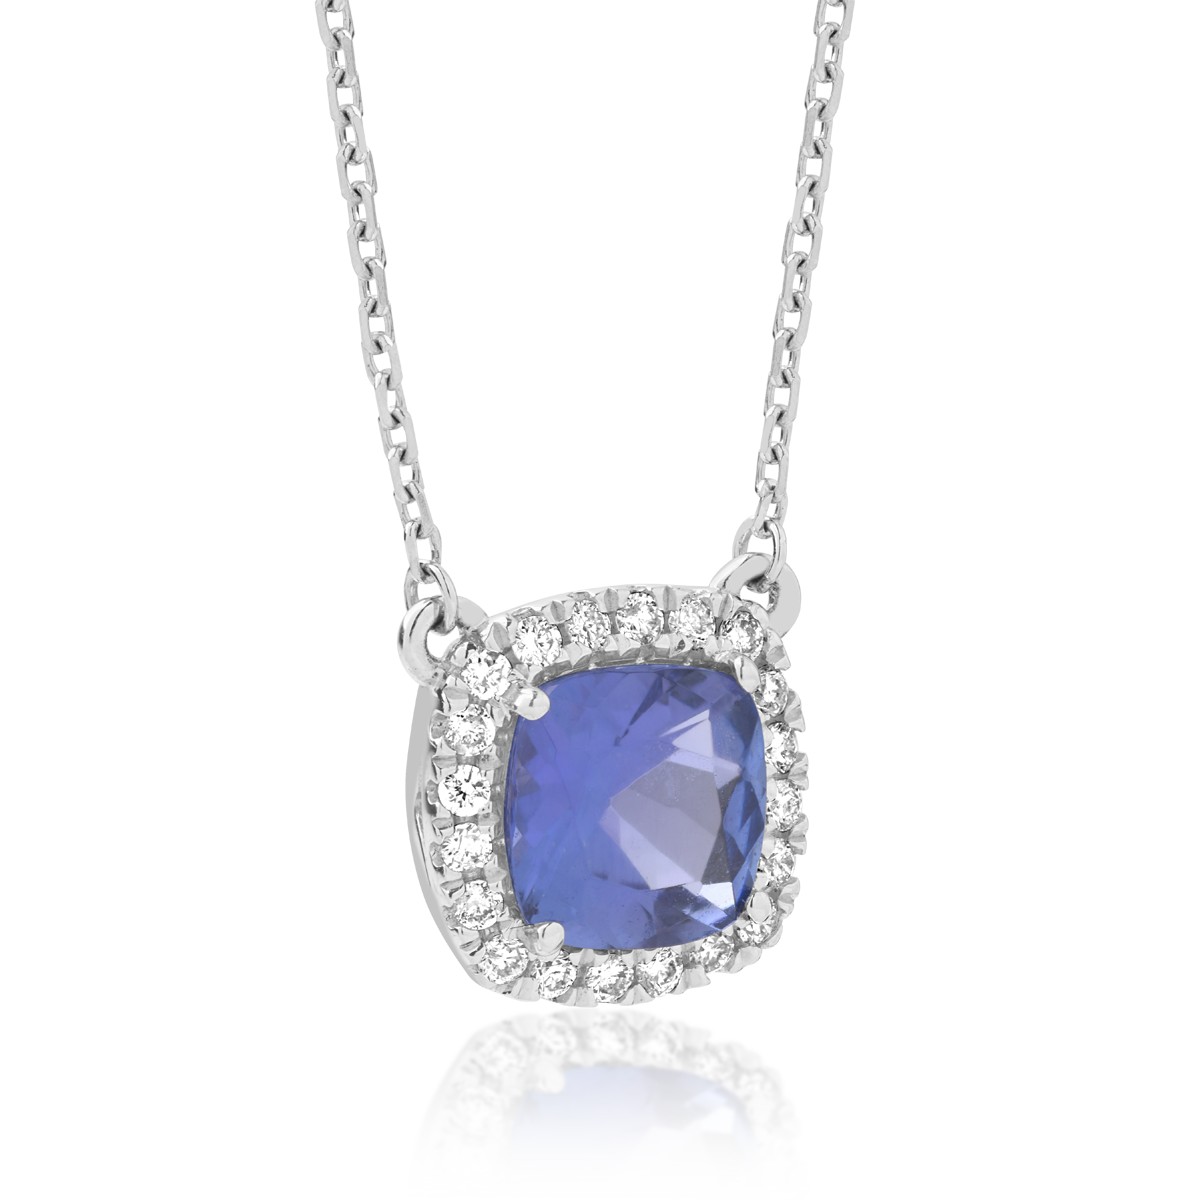 18K white gold pendant necklace with tanzanite of 1.56ct and diamonds of 0.14ct